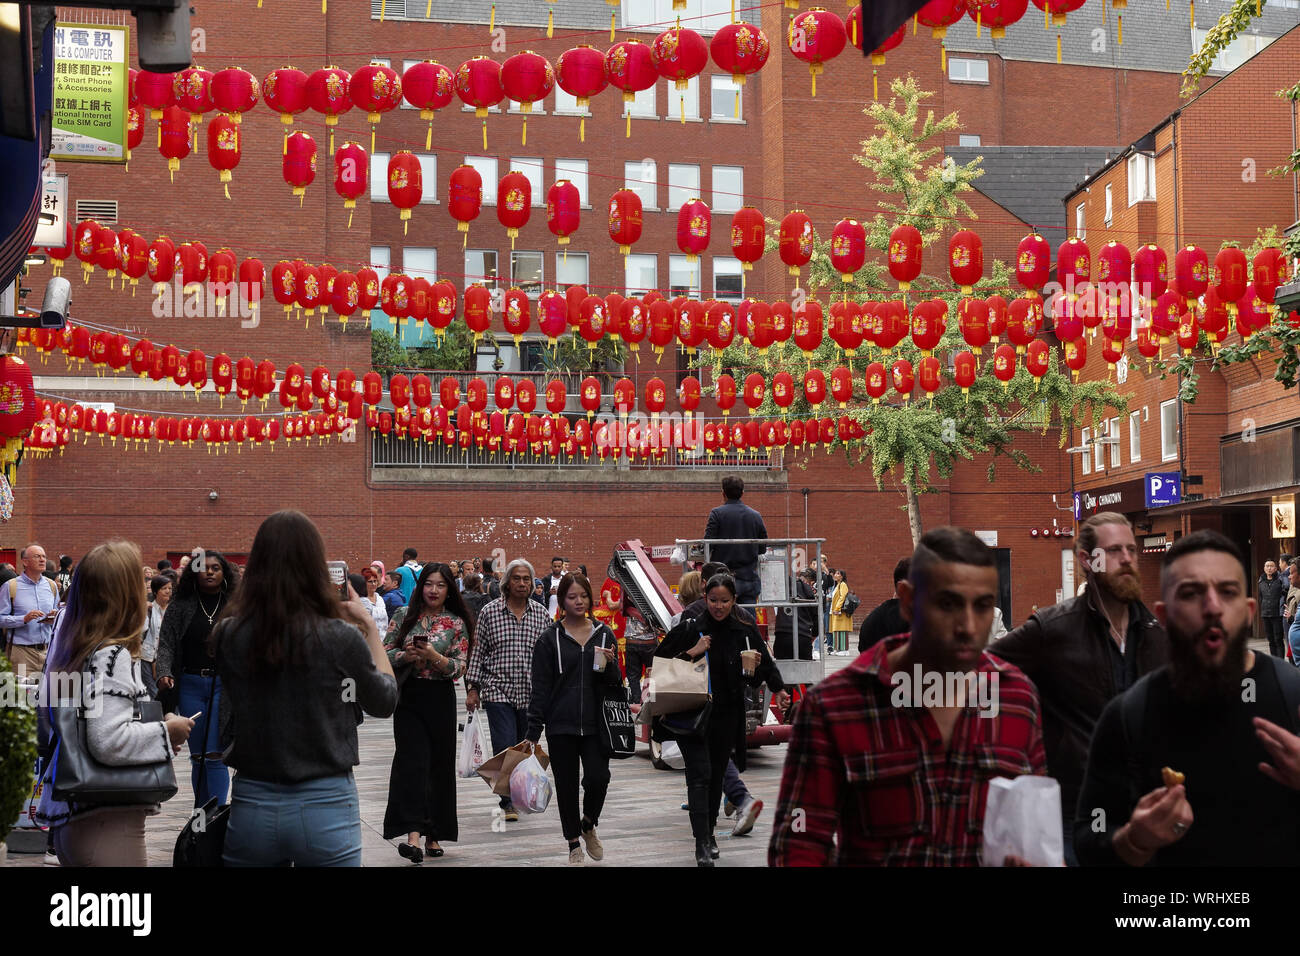 London, UK. 10th Sep, 2019. 10 September 2019. London, UK.Chinatown in Soho prepares for Chinese traditional mid-autumn festival with strings of decorated red lanterns strung above the street. Credit Peter Hogan/Alamy Credit: Peter Hogan/Alamy Live News Stock Photo